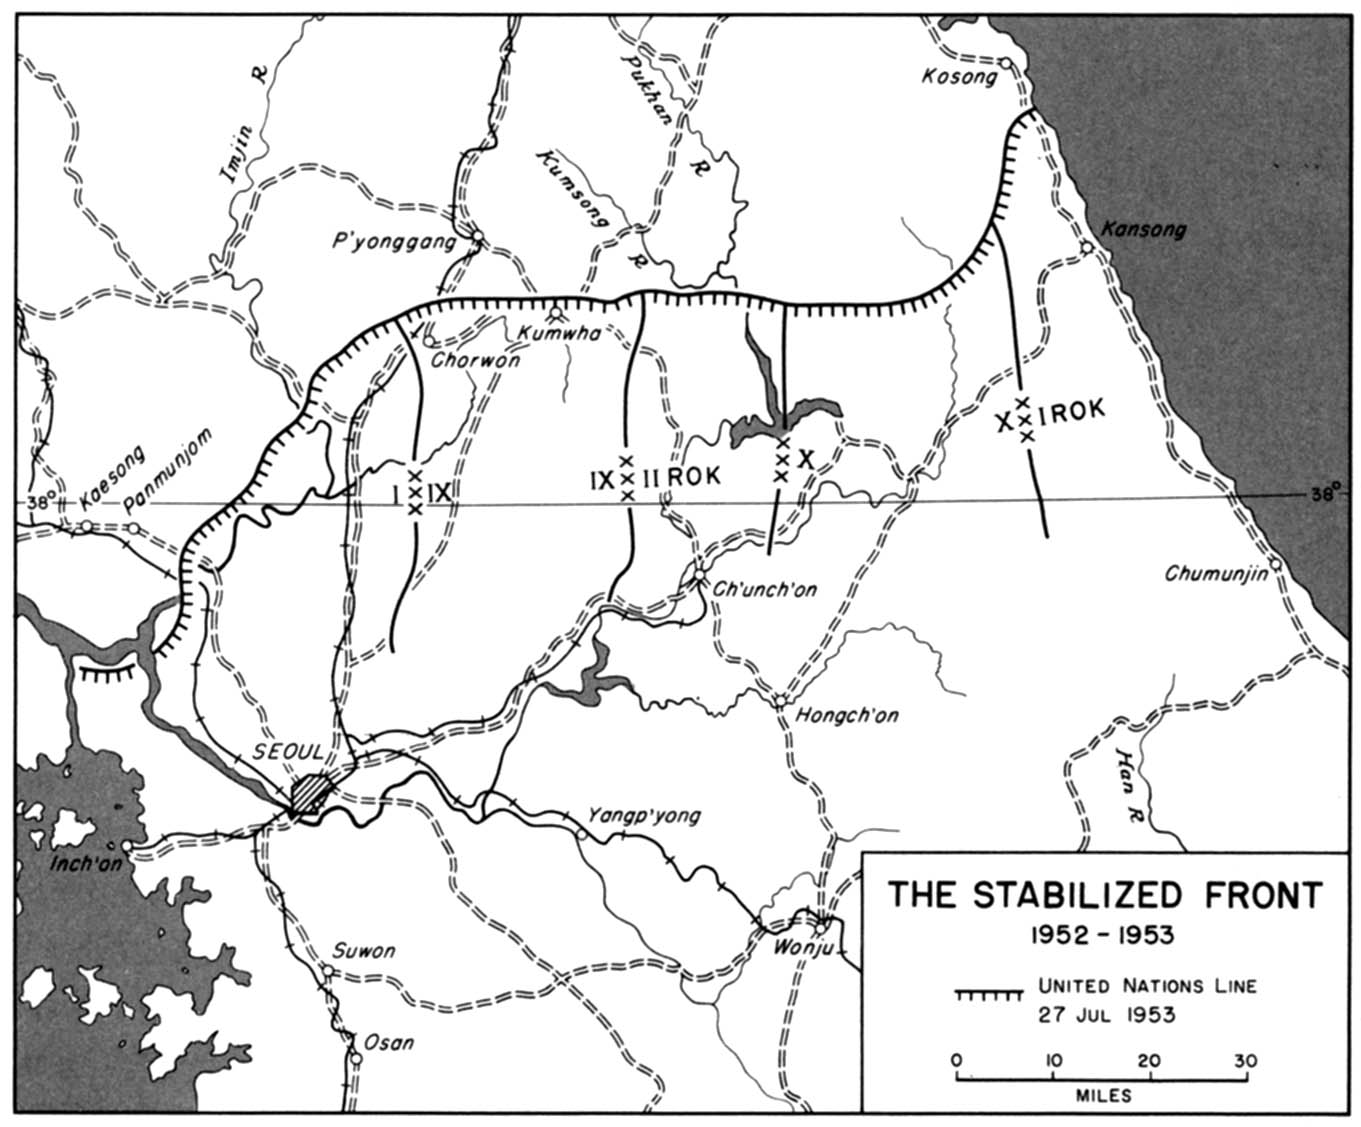 Historical Maps of United States. 1952-1953 - The Stabilized Front 1952-1953 (194K) 